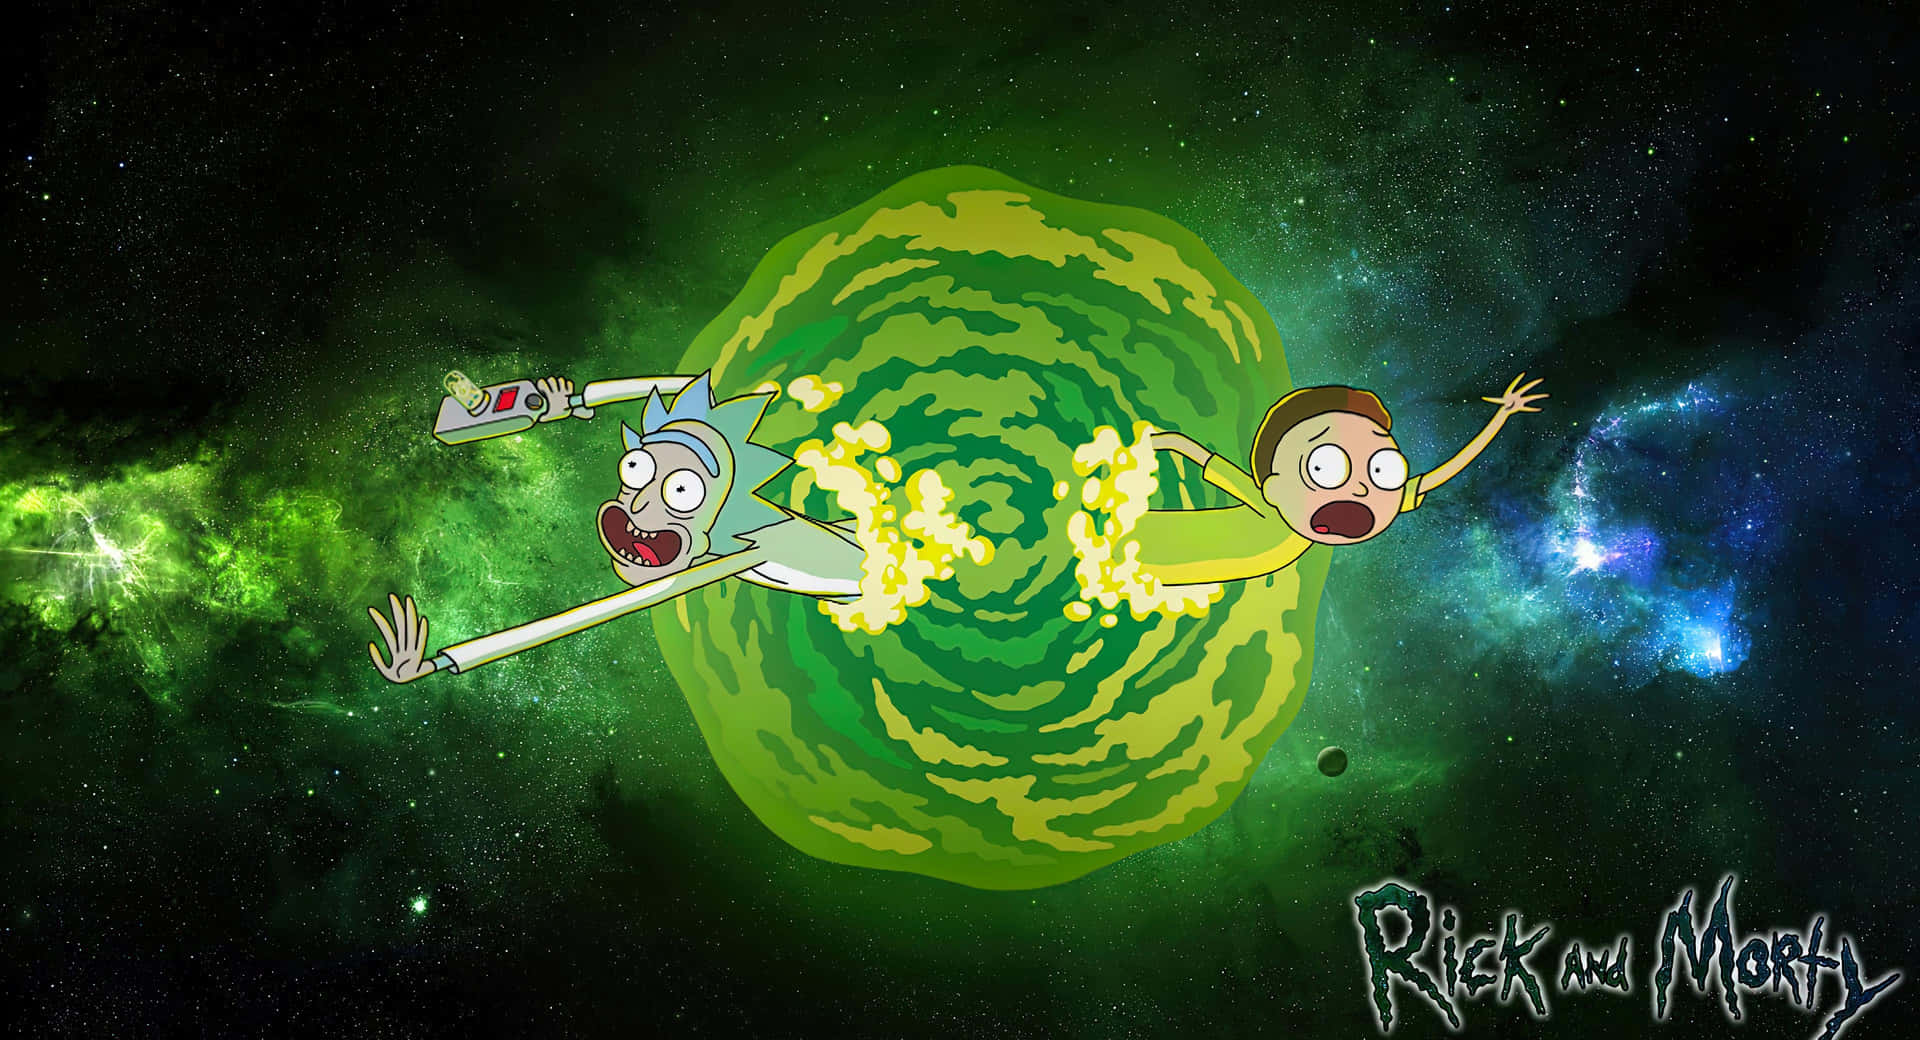 Blast off into the interplanetary world of Rick and Morty with this uniquely designed laptop! Wallpaper